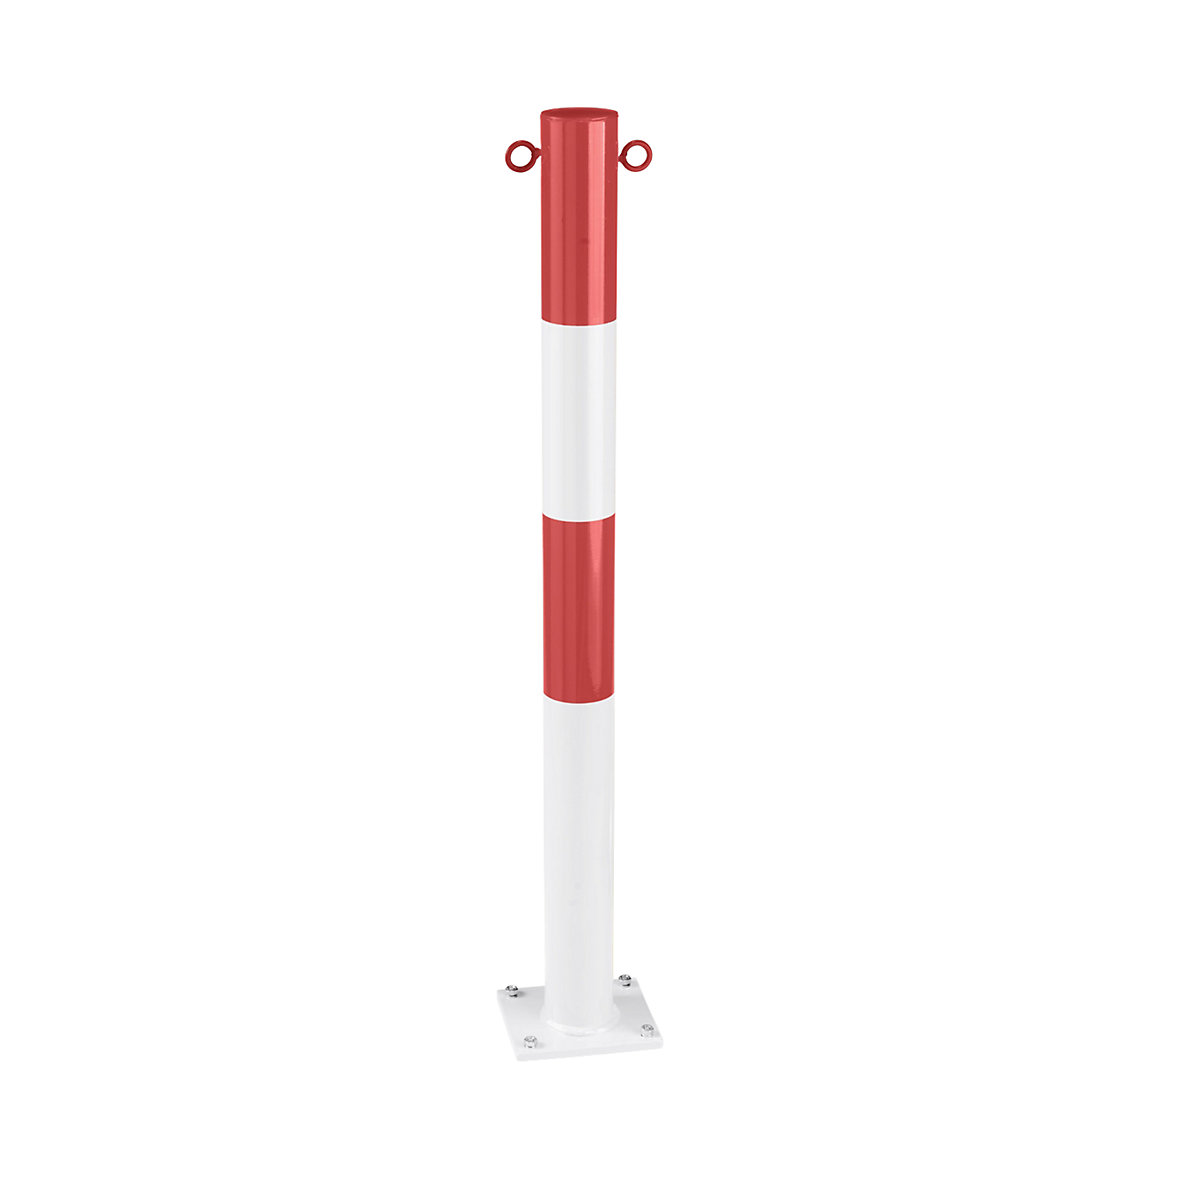 Barrier post made of tubular steel, for bolting in place, Ø 76 mm, red / white, zinc plated and painted-2